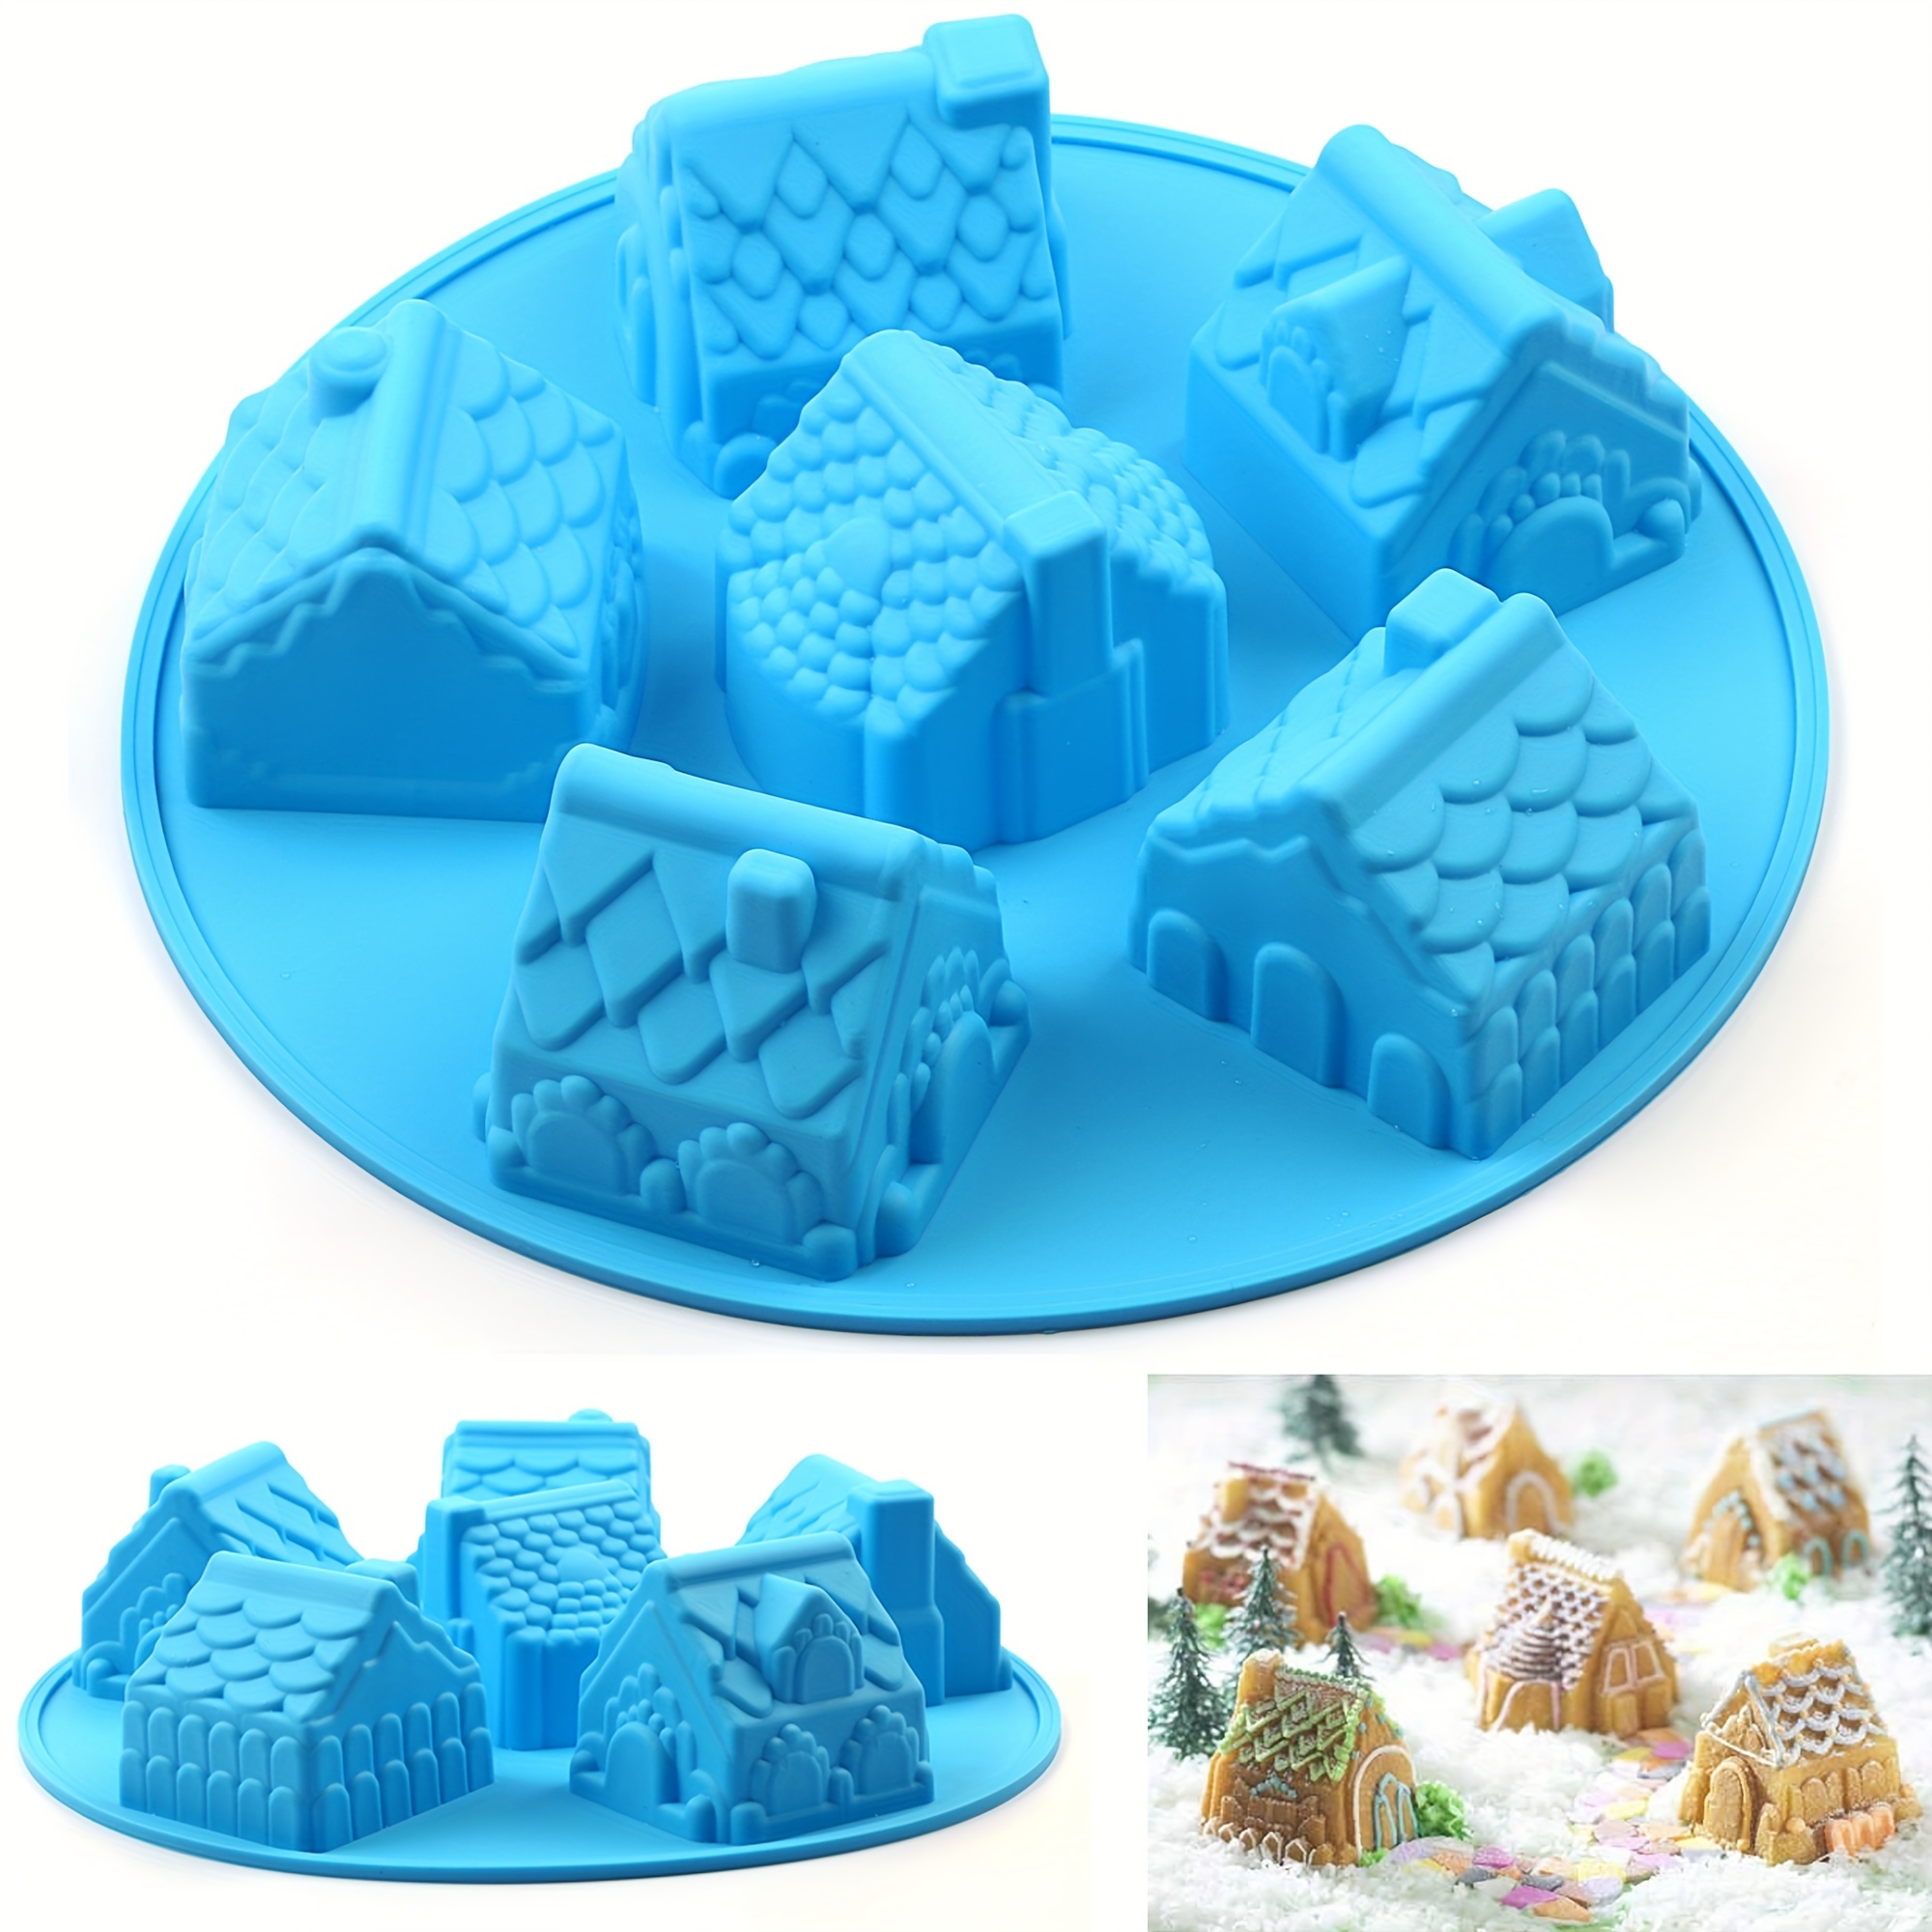 1pc Christmas Gingerbread House Cake Silicone Mold 6 Connected House Shaped Baking  Mold, For Diy Cake, Candy, Chocolate, Candle, Soap, Christmas Cake  Decorating